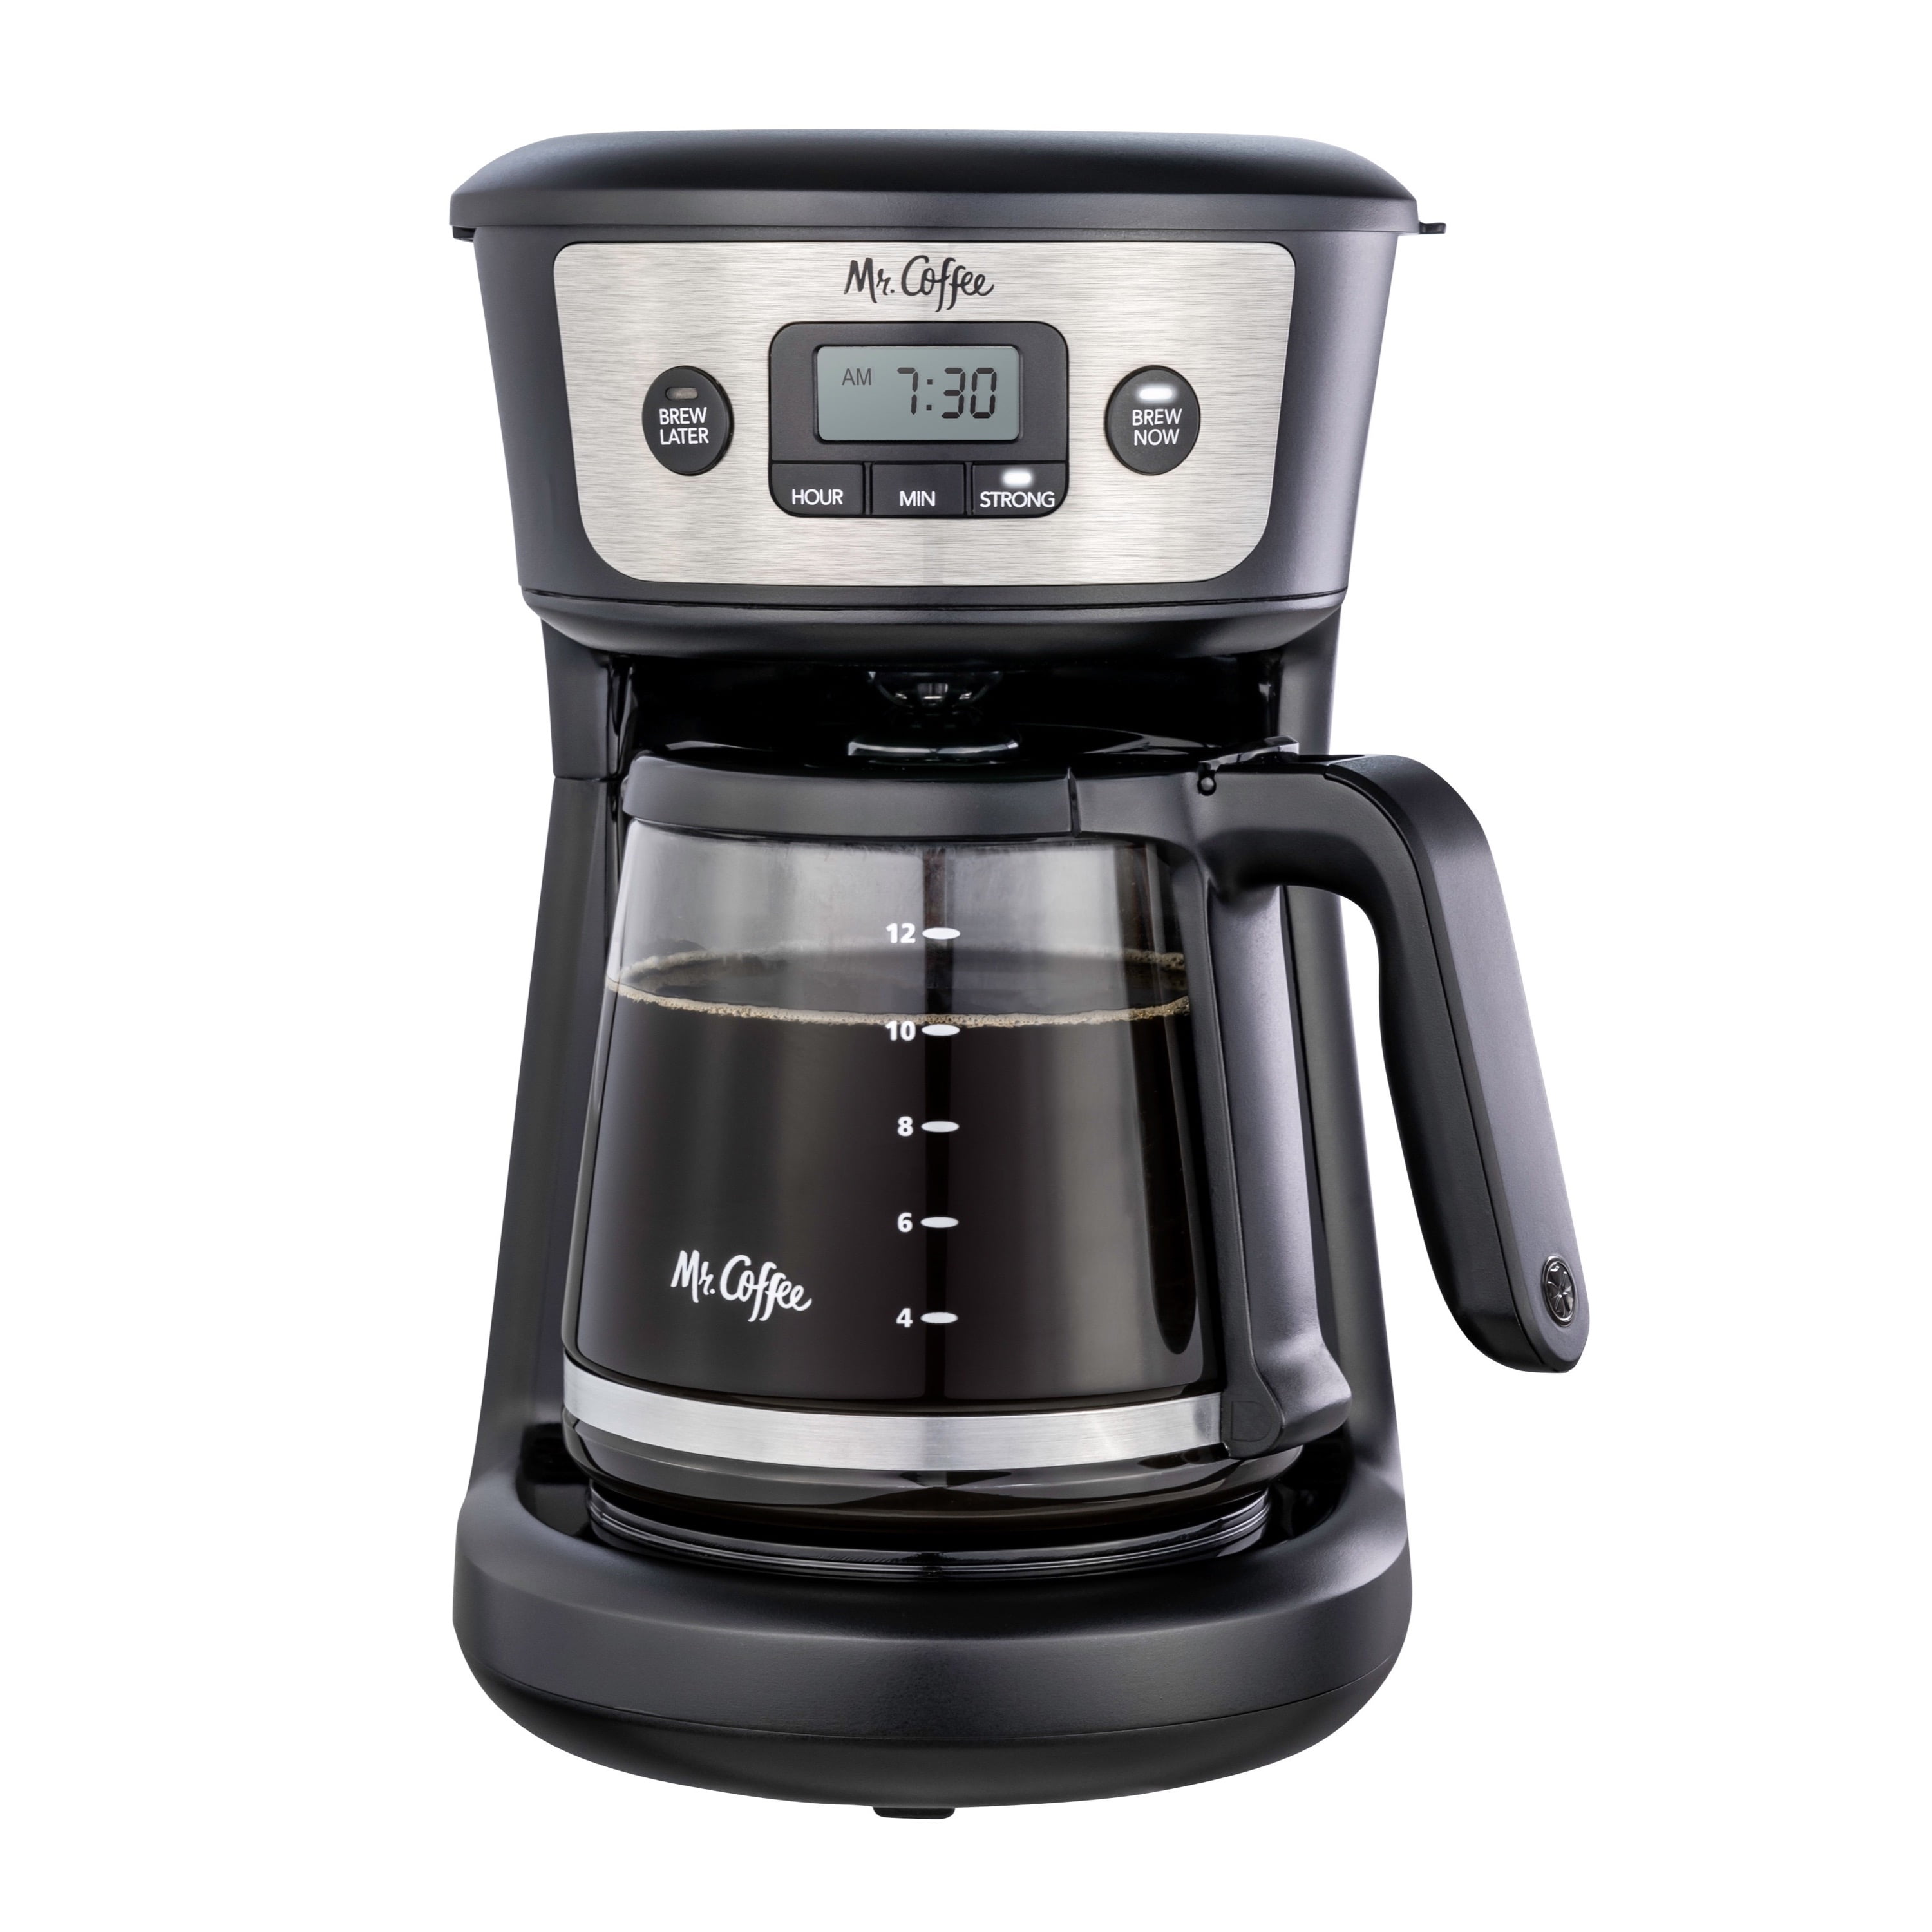 Coffee 5 Cup Coffeemaker Brewing Morning Clock Programable Brew Later New Mr 